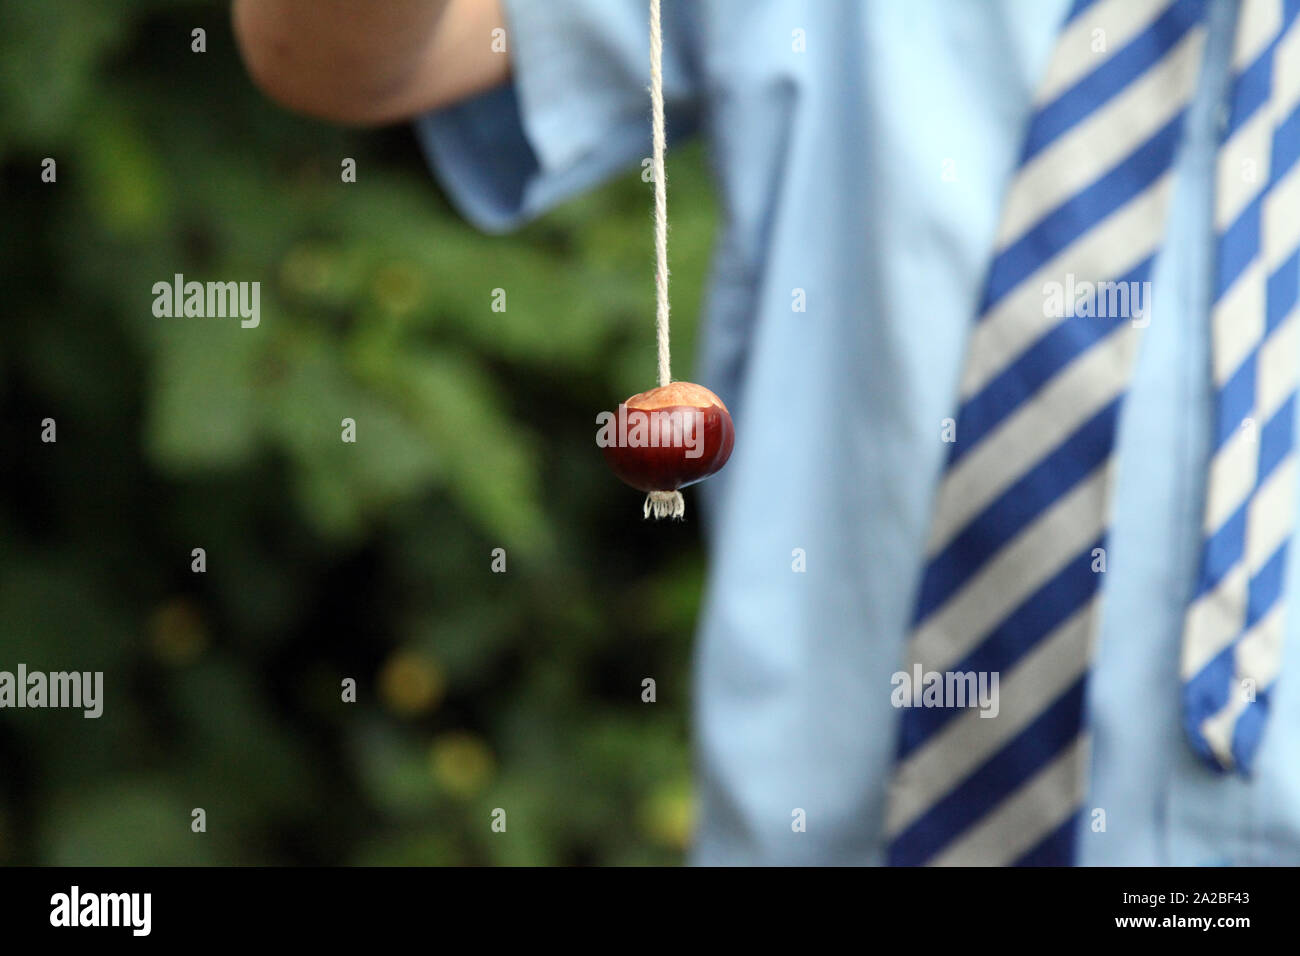 Primary schoolboy in school uniform playing a game of conkers, holding a conker on a string closeup, outside in Autumn Stock Photo